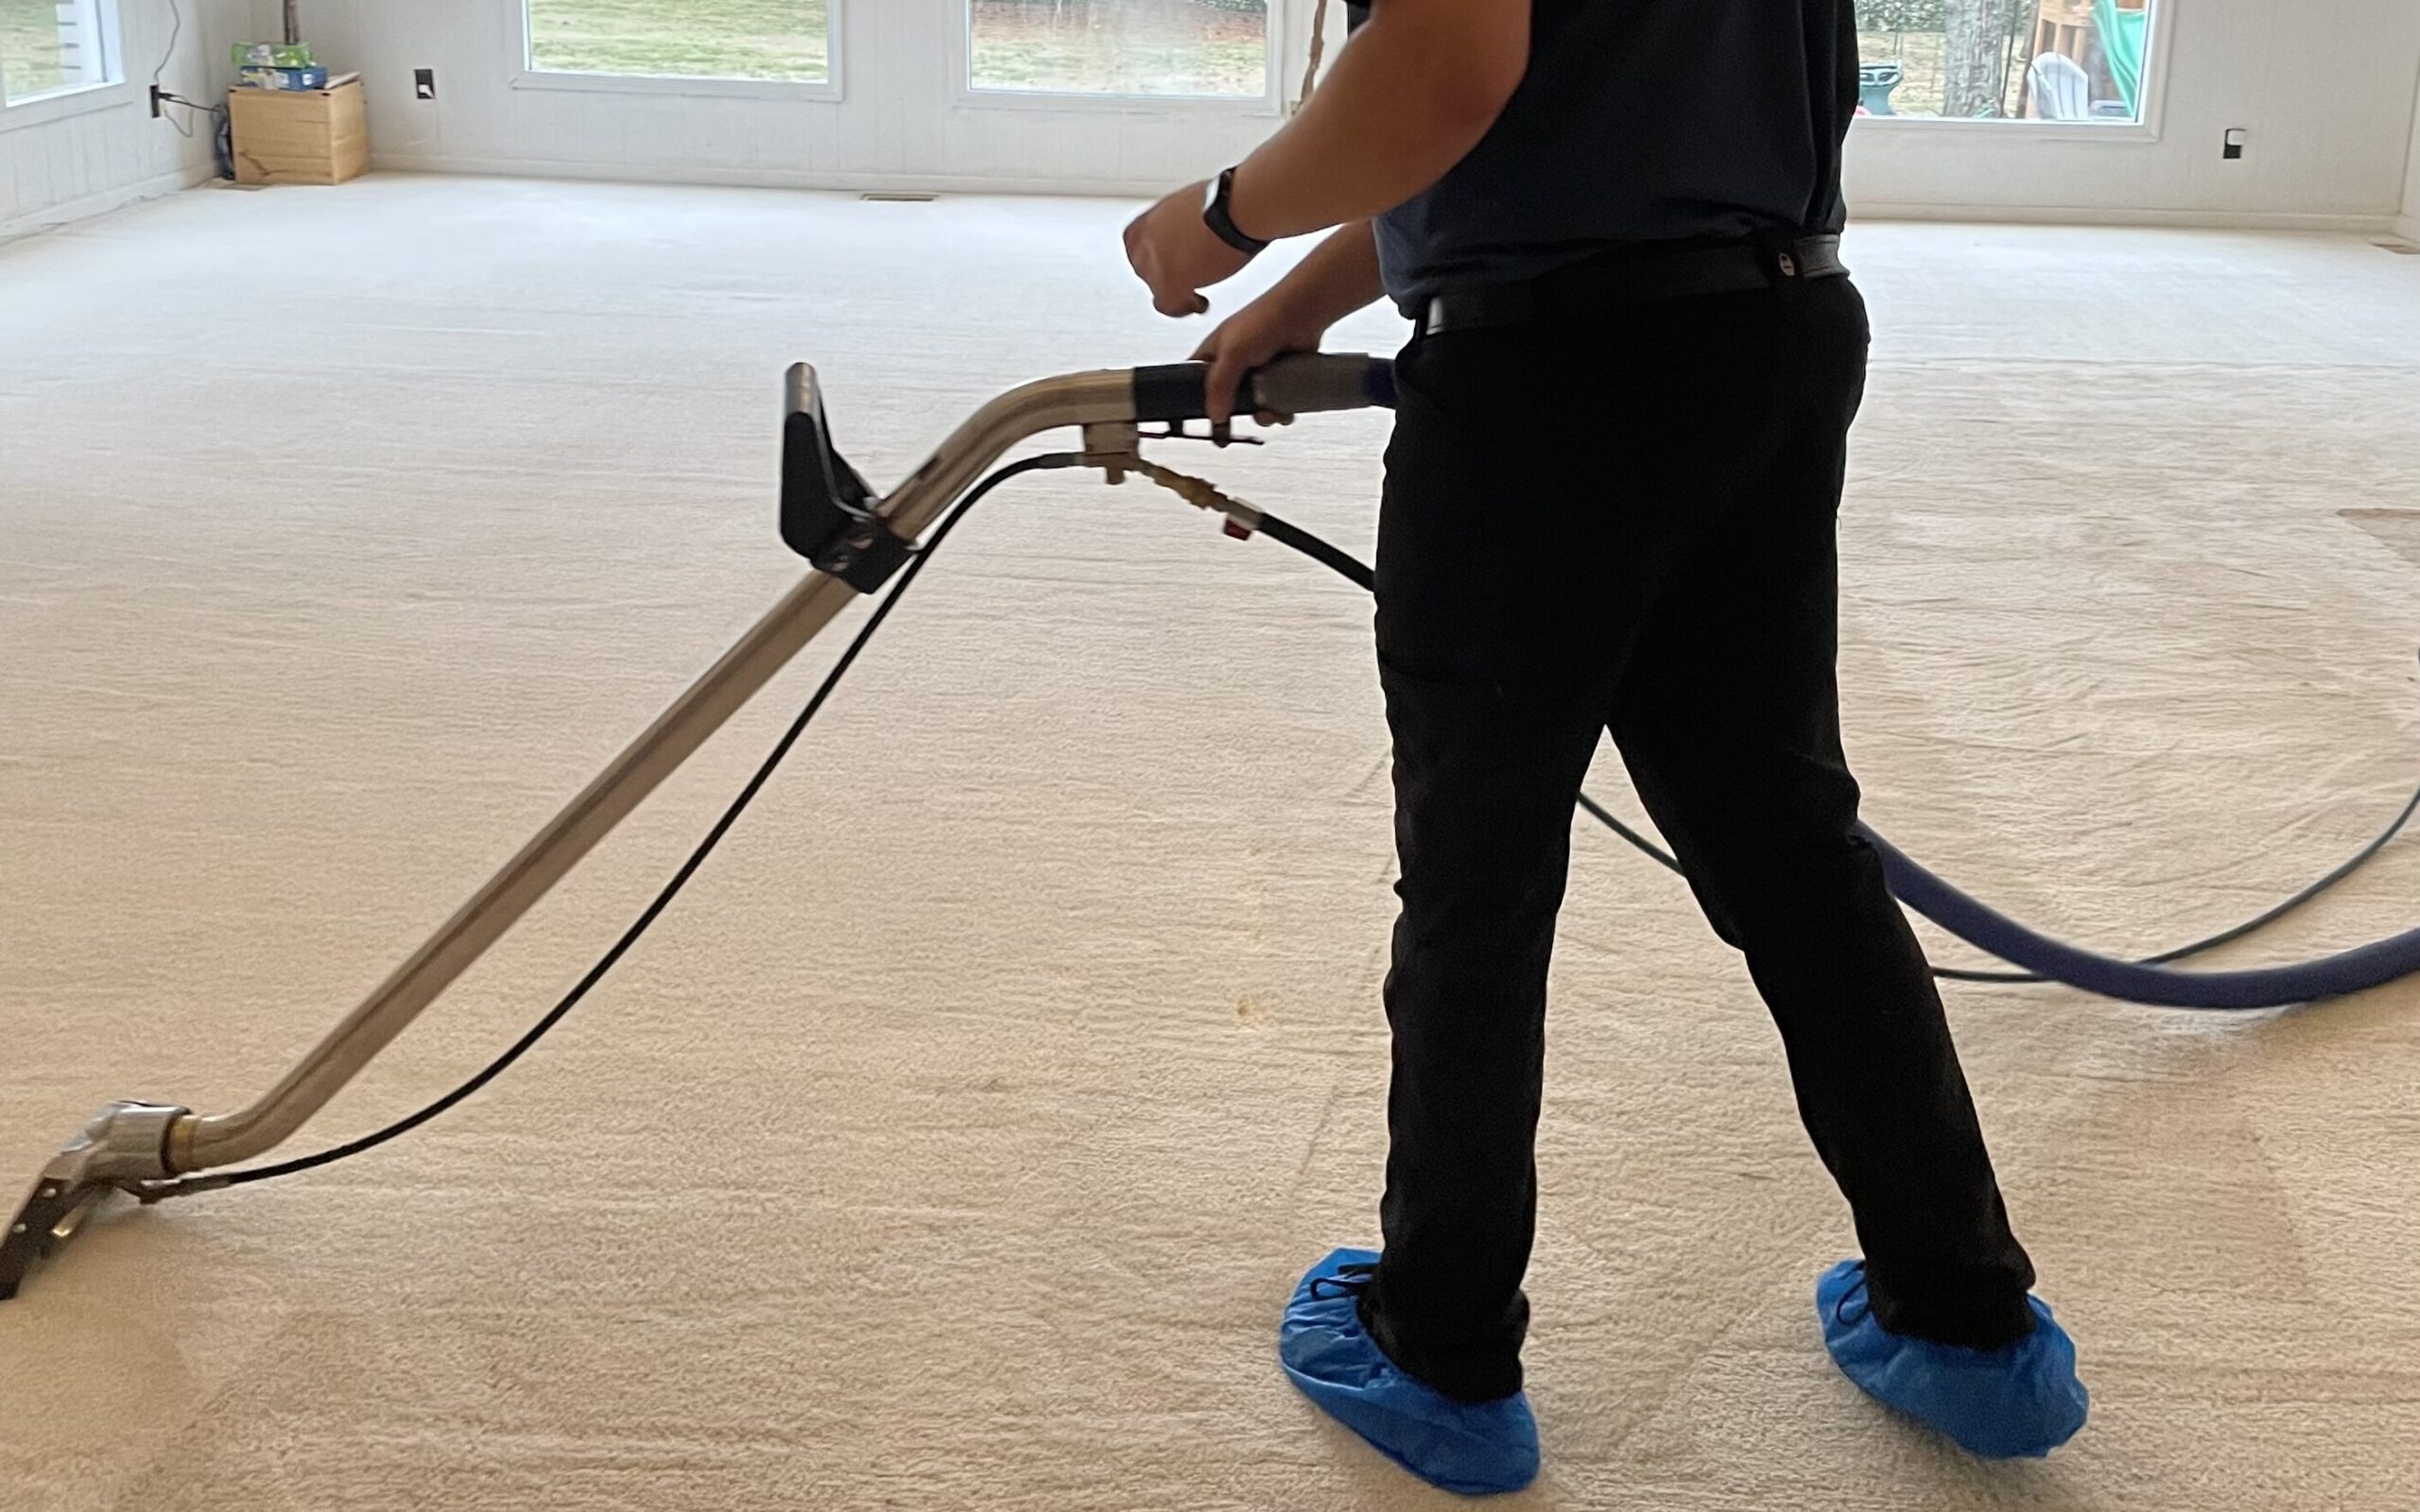 Technician extracts ivory carpet in client's home.